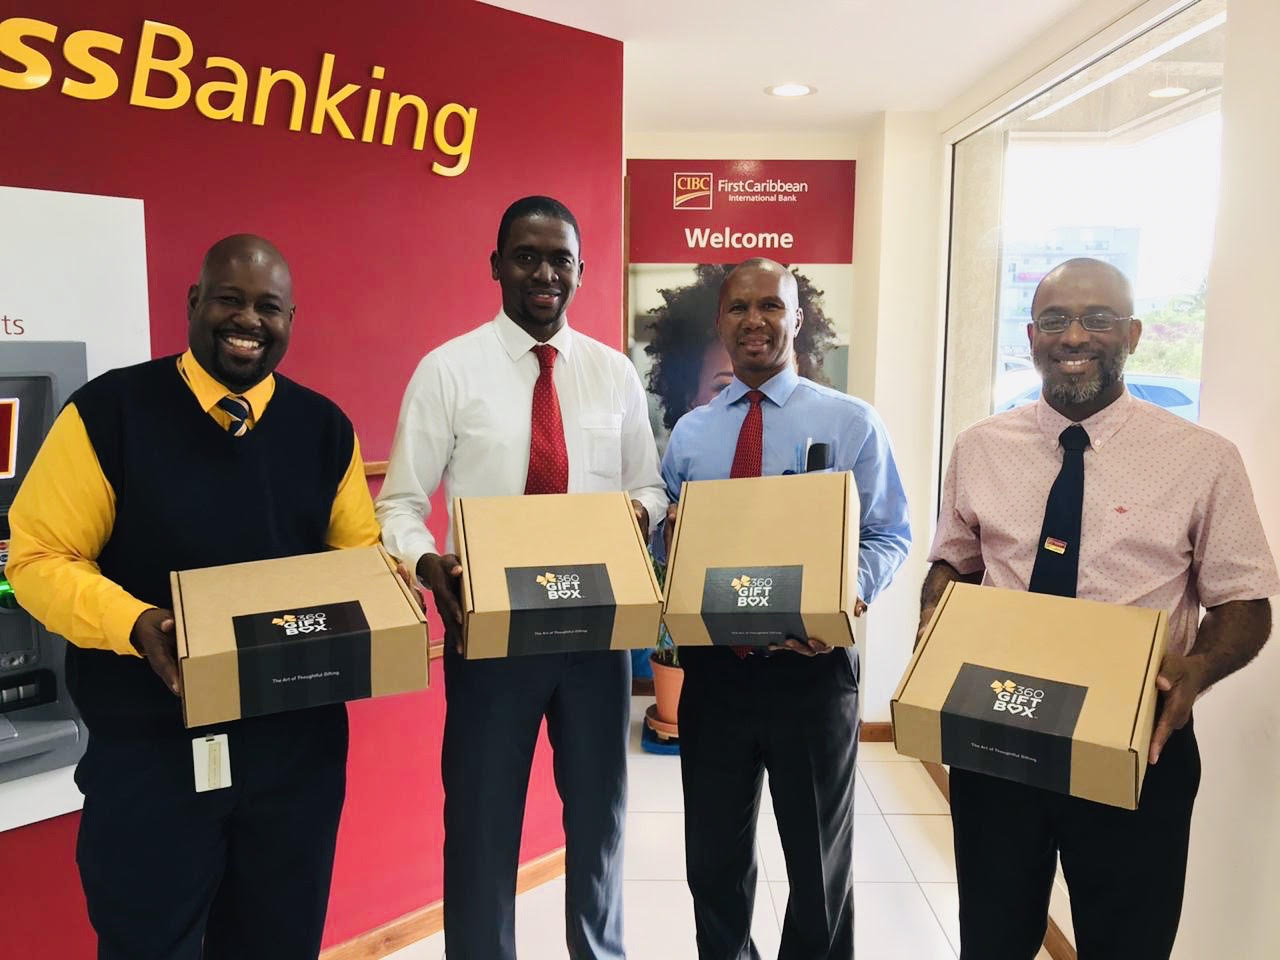 Male staff members at CIBC FirstCaribbean Cole Bay Branch receiving gifts of appreciation for their positive contributions. - Men's